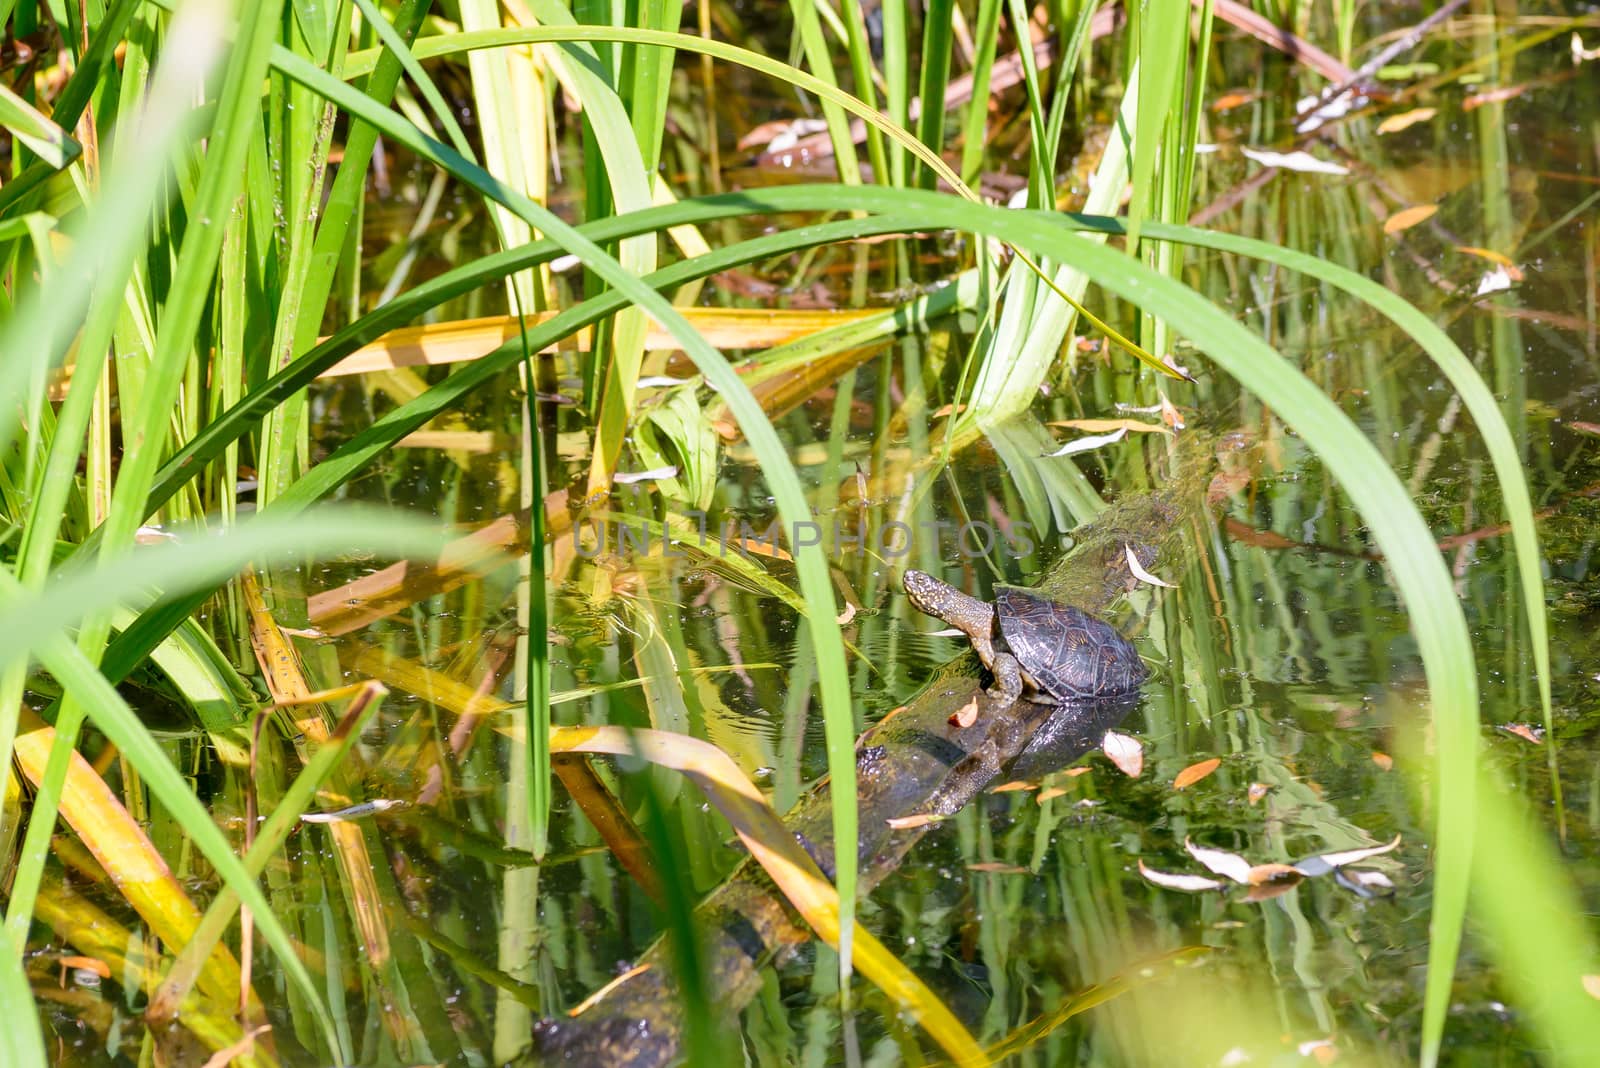 An aquatic turtle is resting under the sun on a tree branch floating on the pond's water surrounded by Typha latifolia reeds leaves